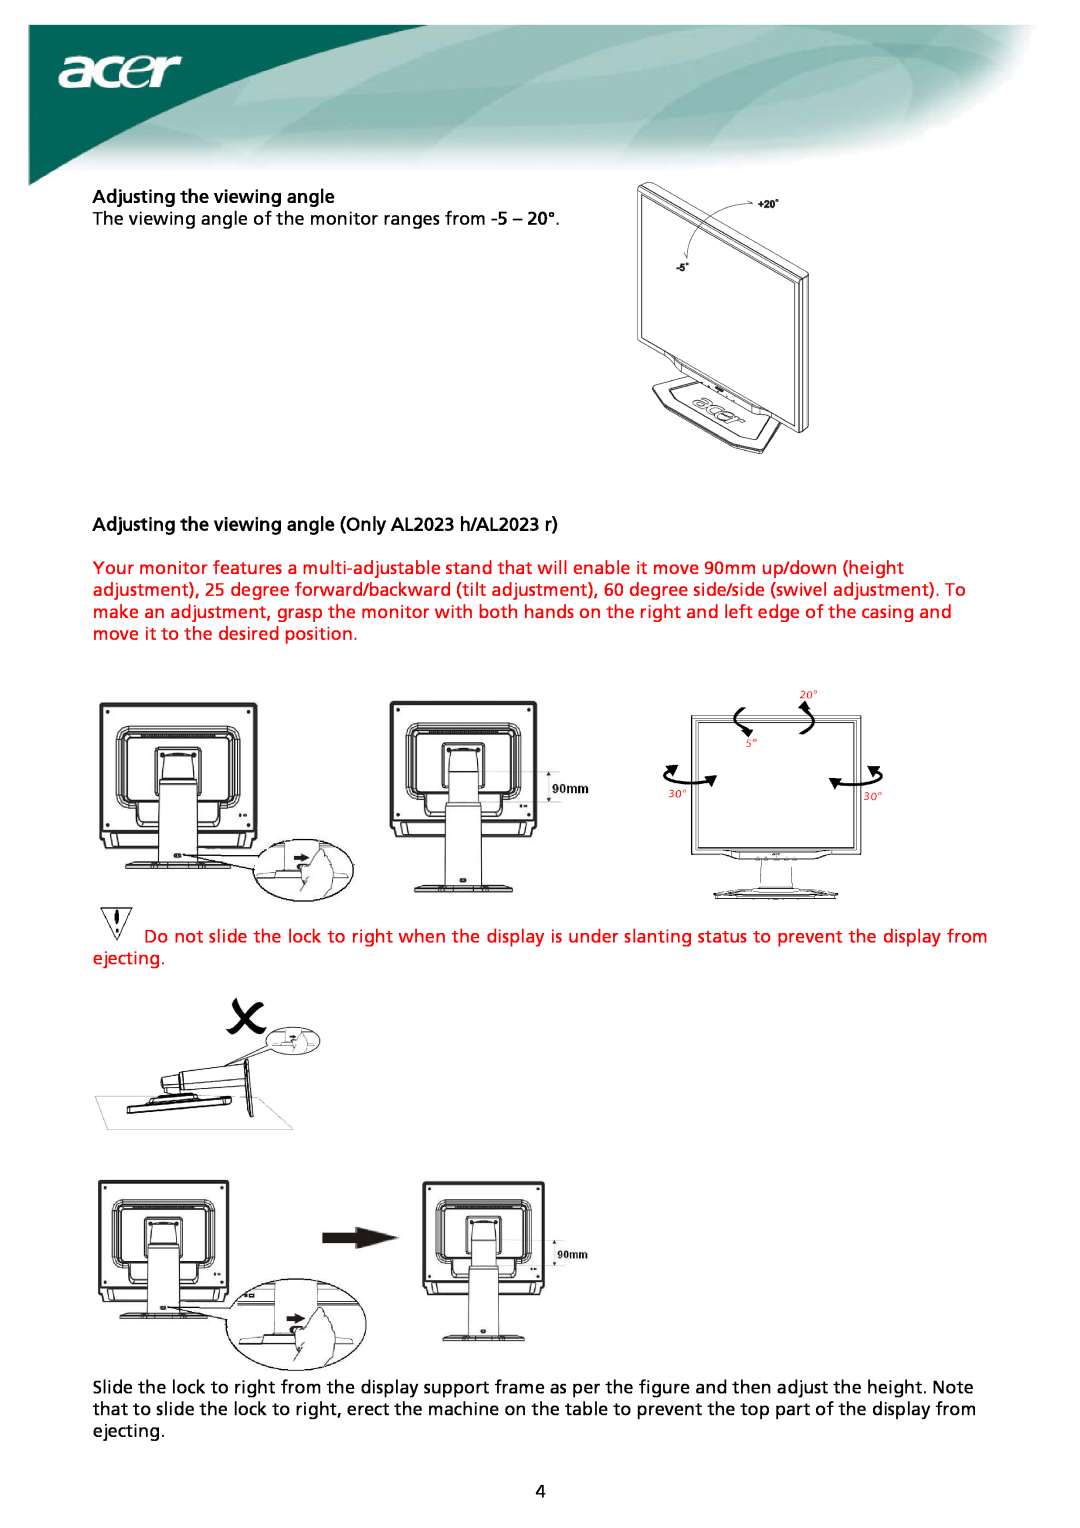 Acer installation instructions Adjusting the viewing angle Only AL2023 h/AL2023 r 